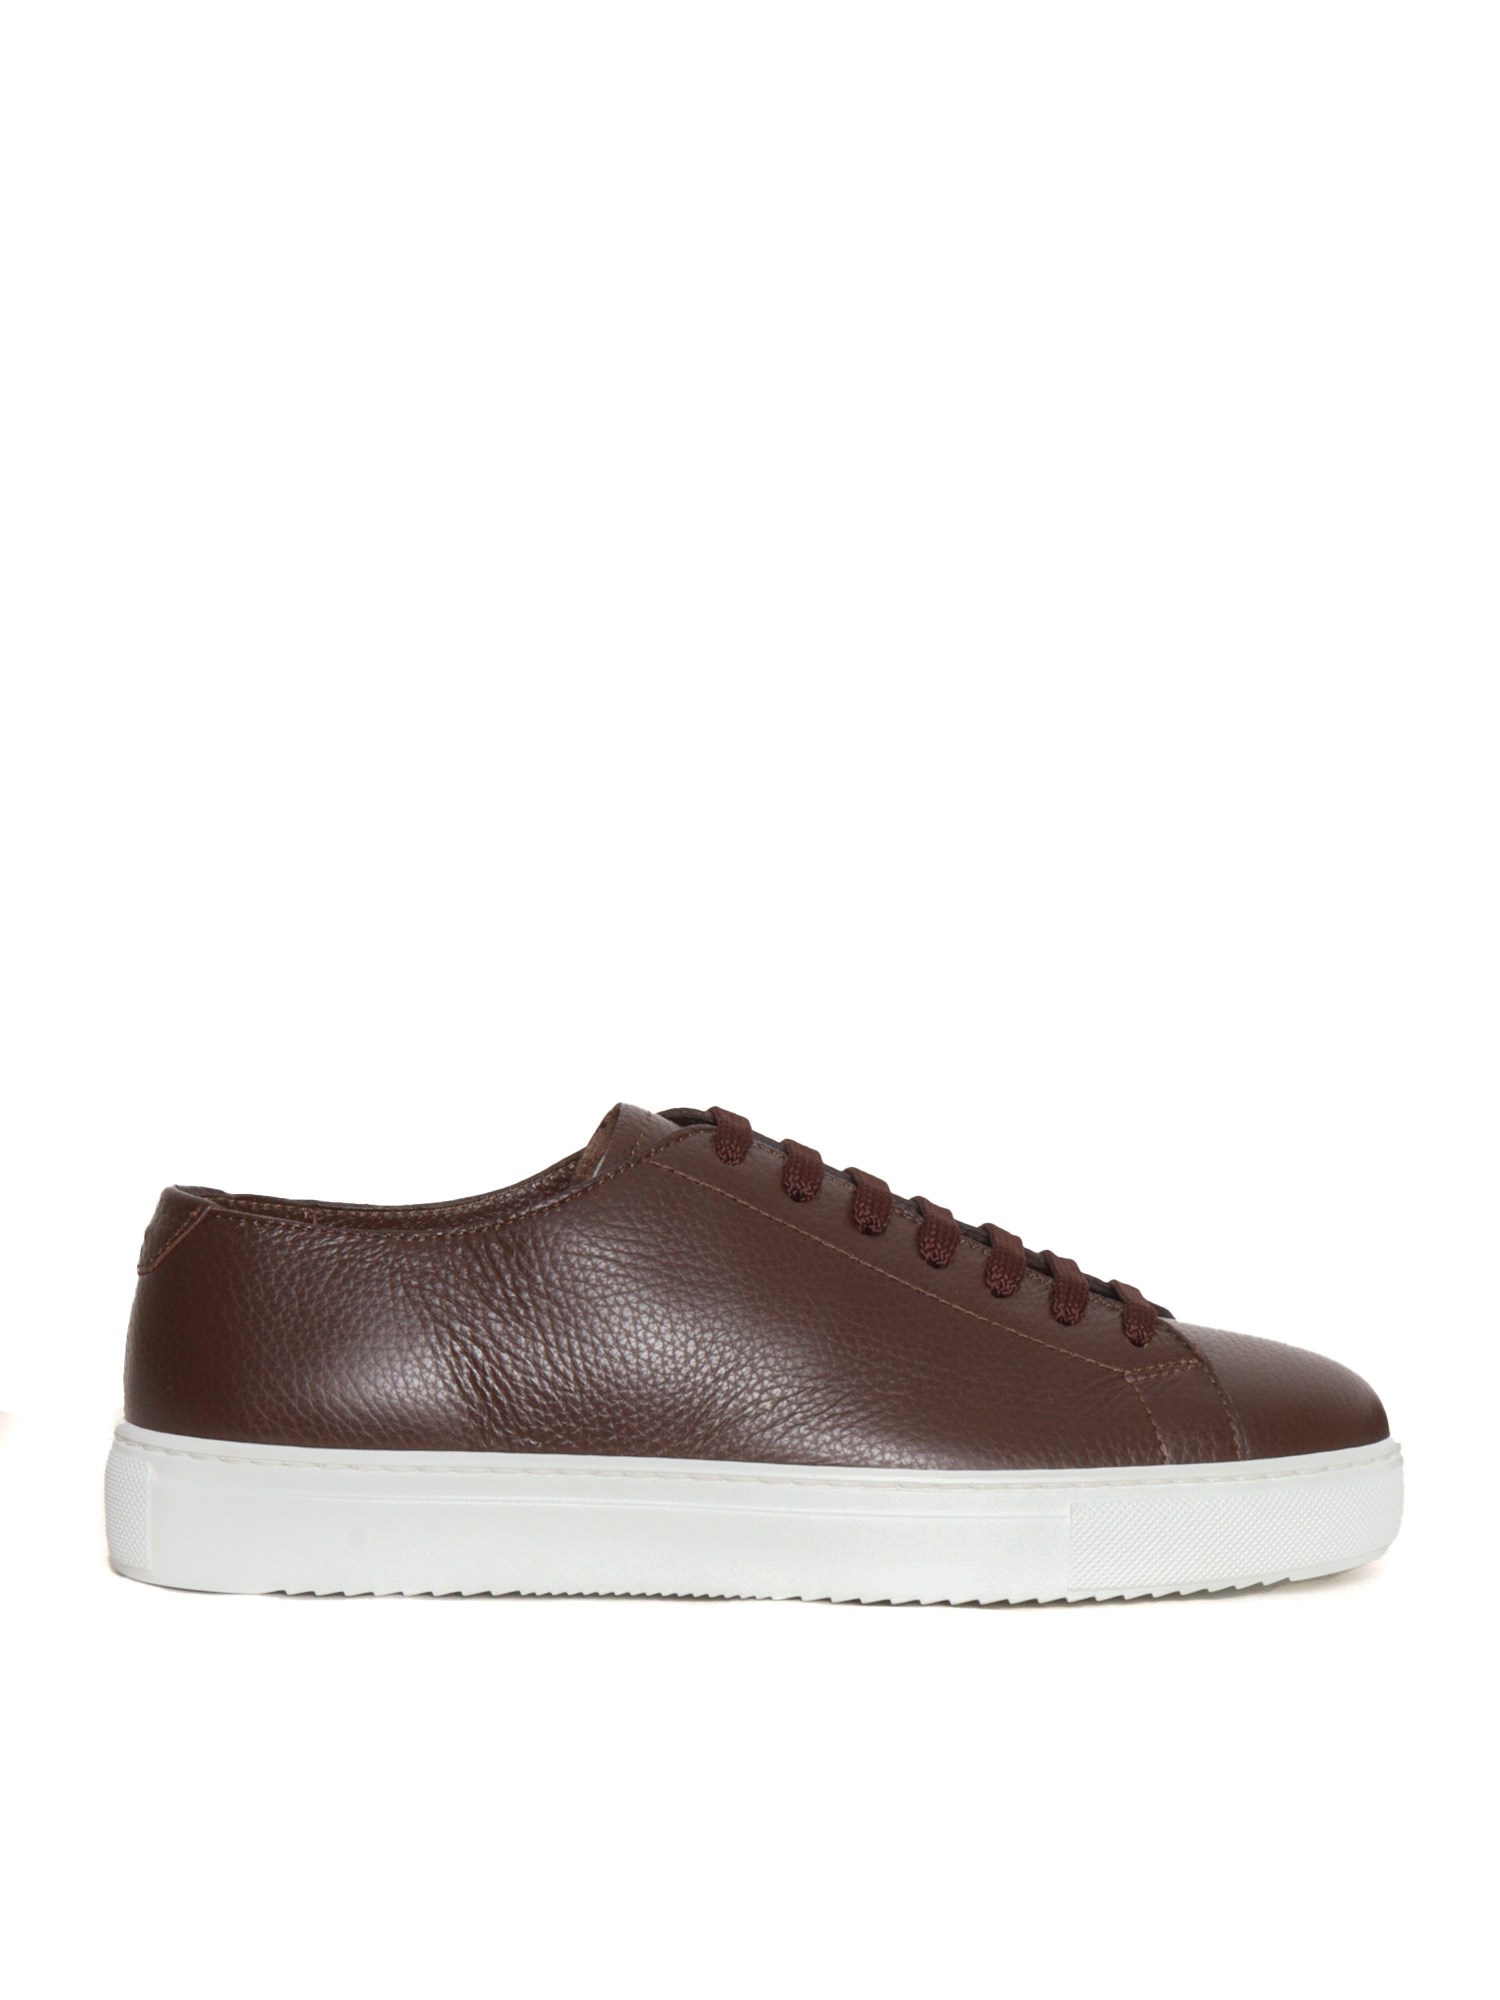 Doucal's Brown Leather Sneakers